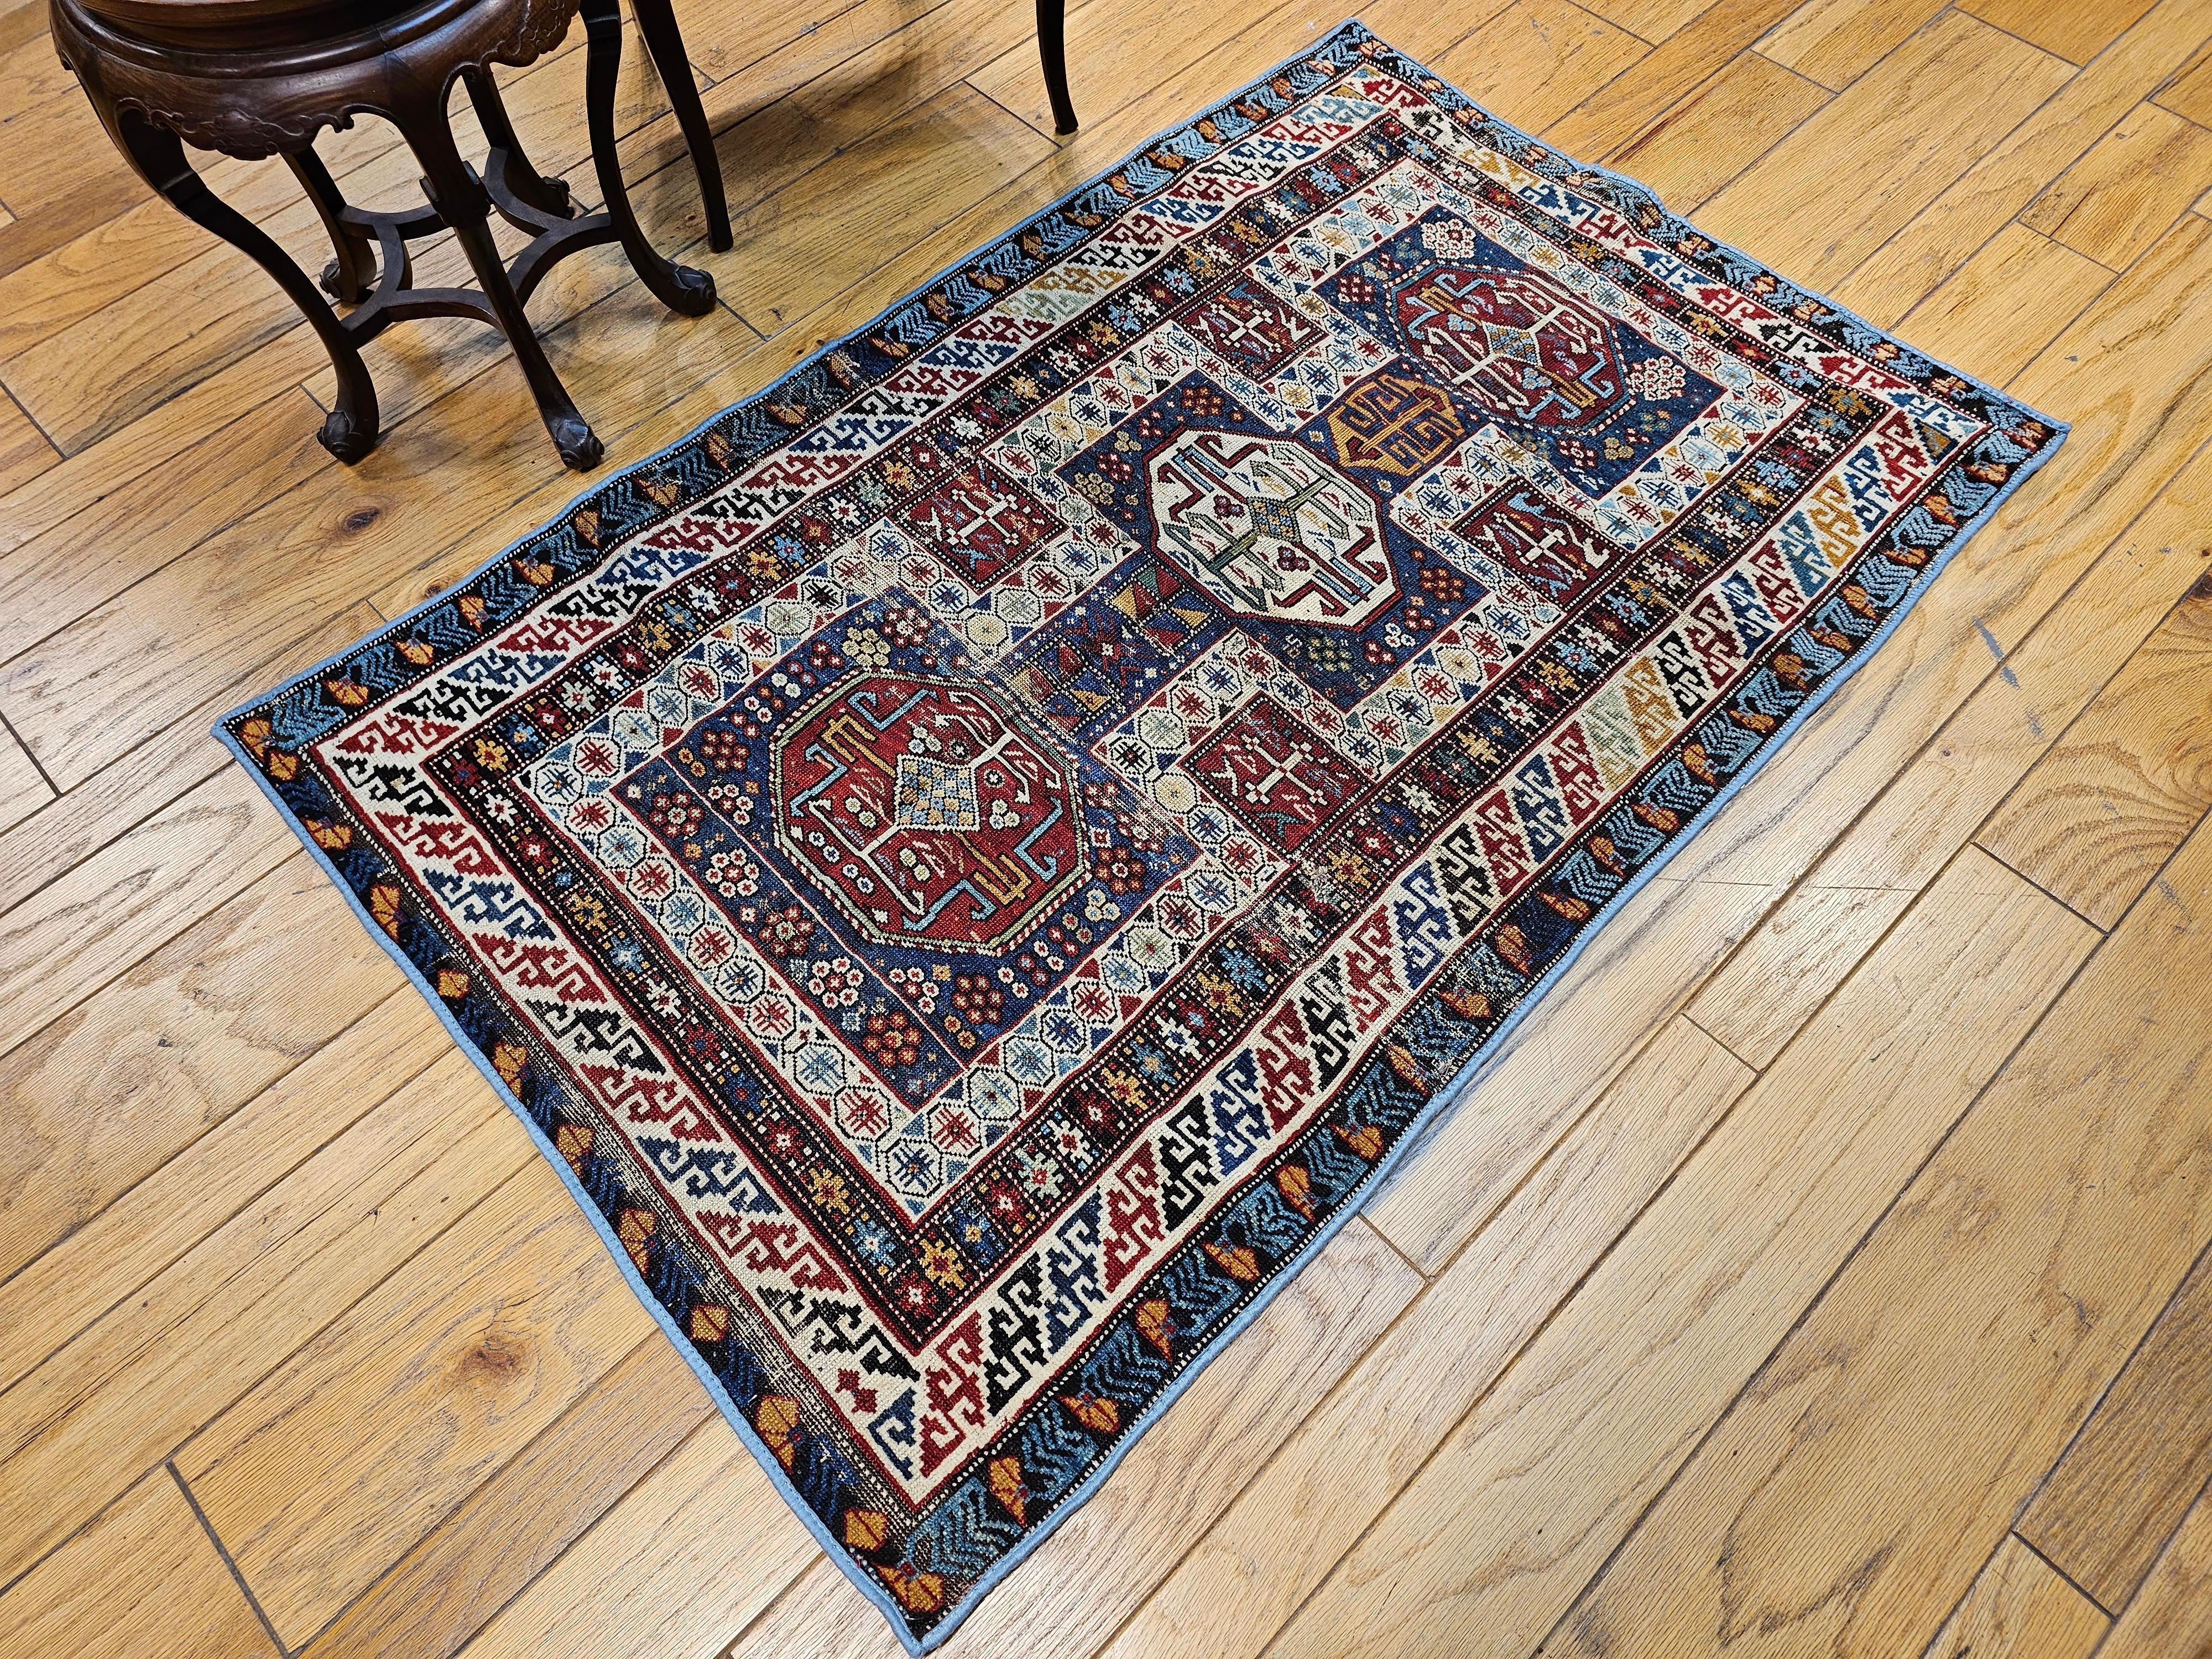  Early 1900s Caucasian Kuba Area Rug in French Blue, Red, Ivory, Yellow For Sale 9